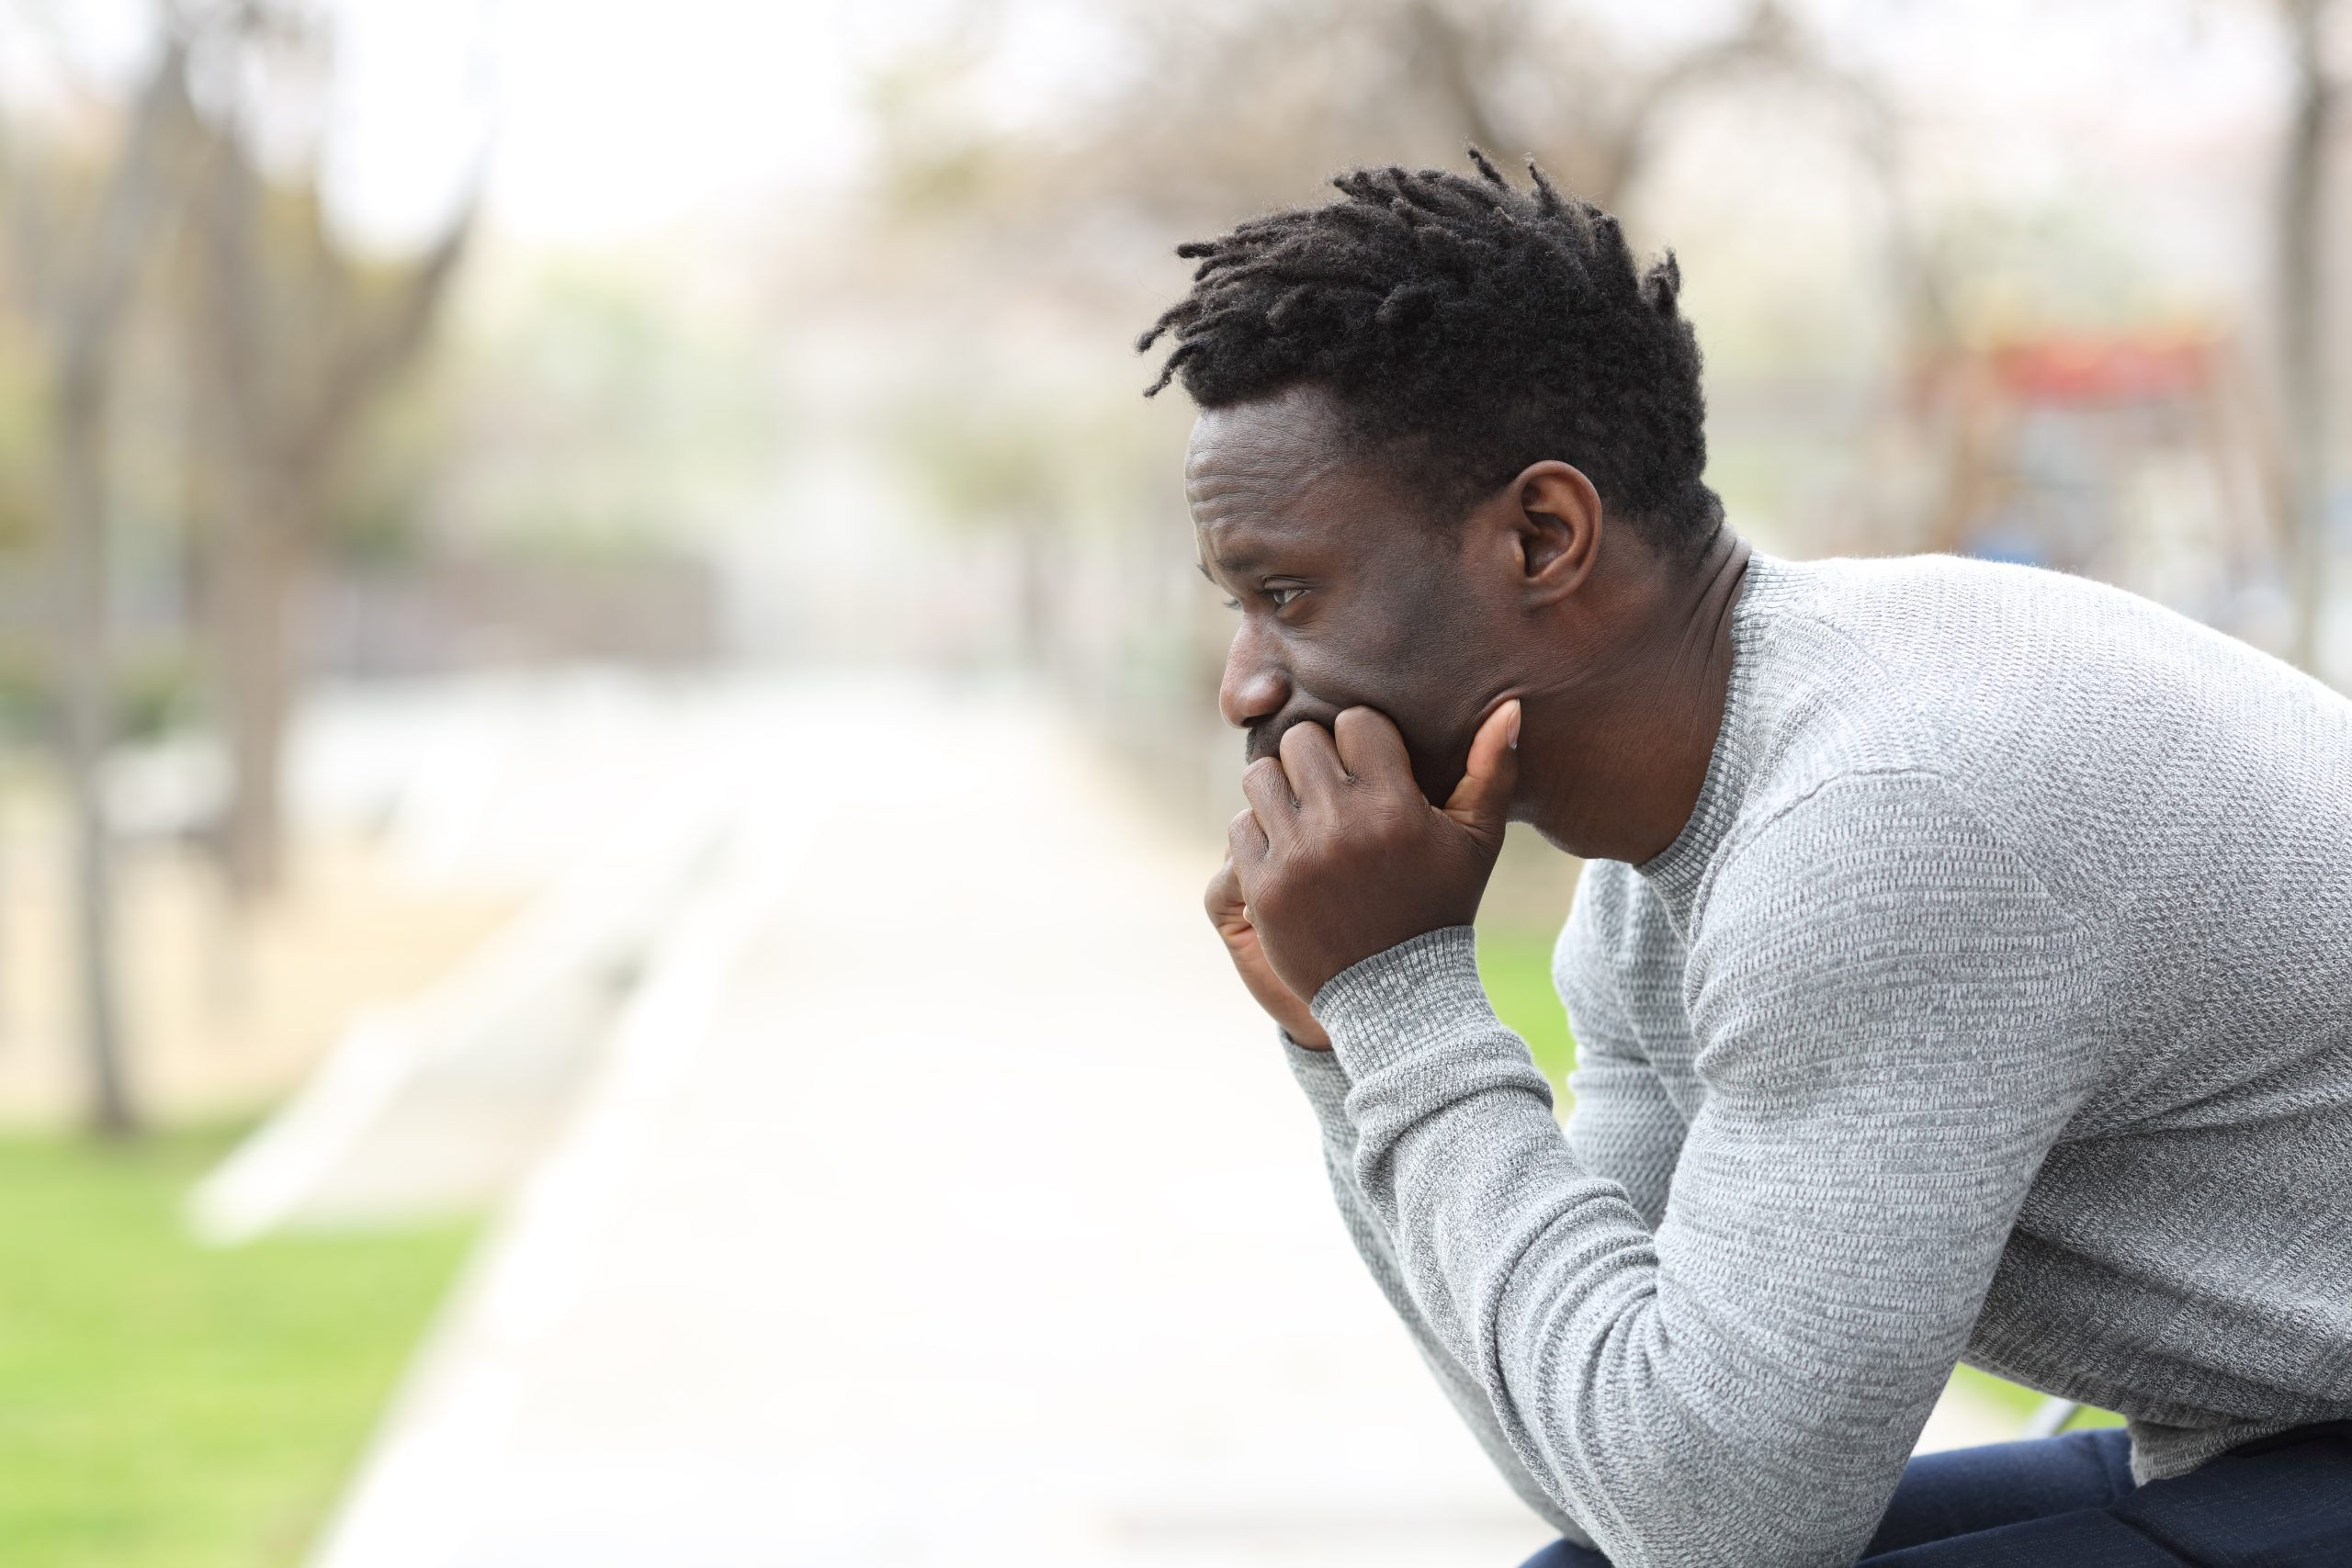 Black male sitting on a bench looking sad